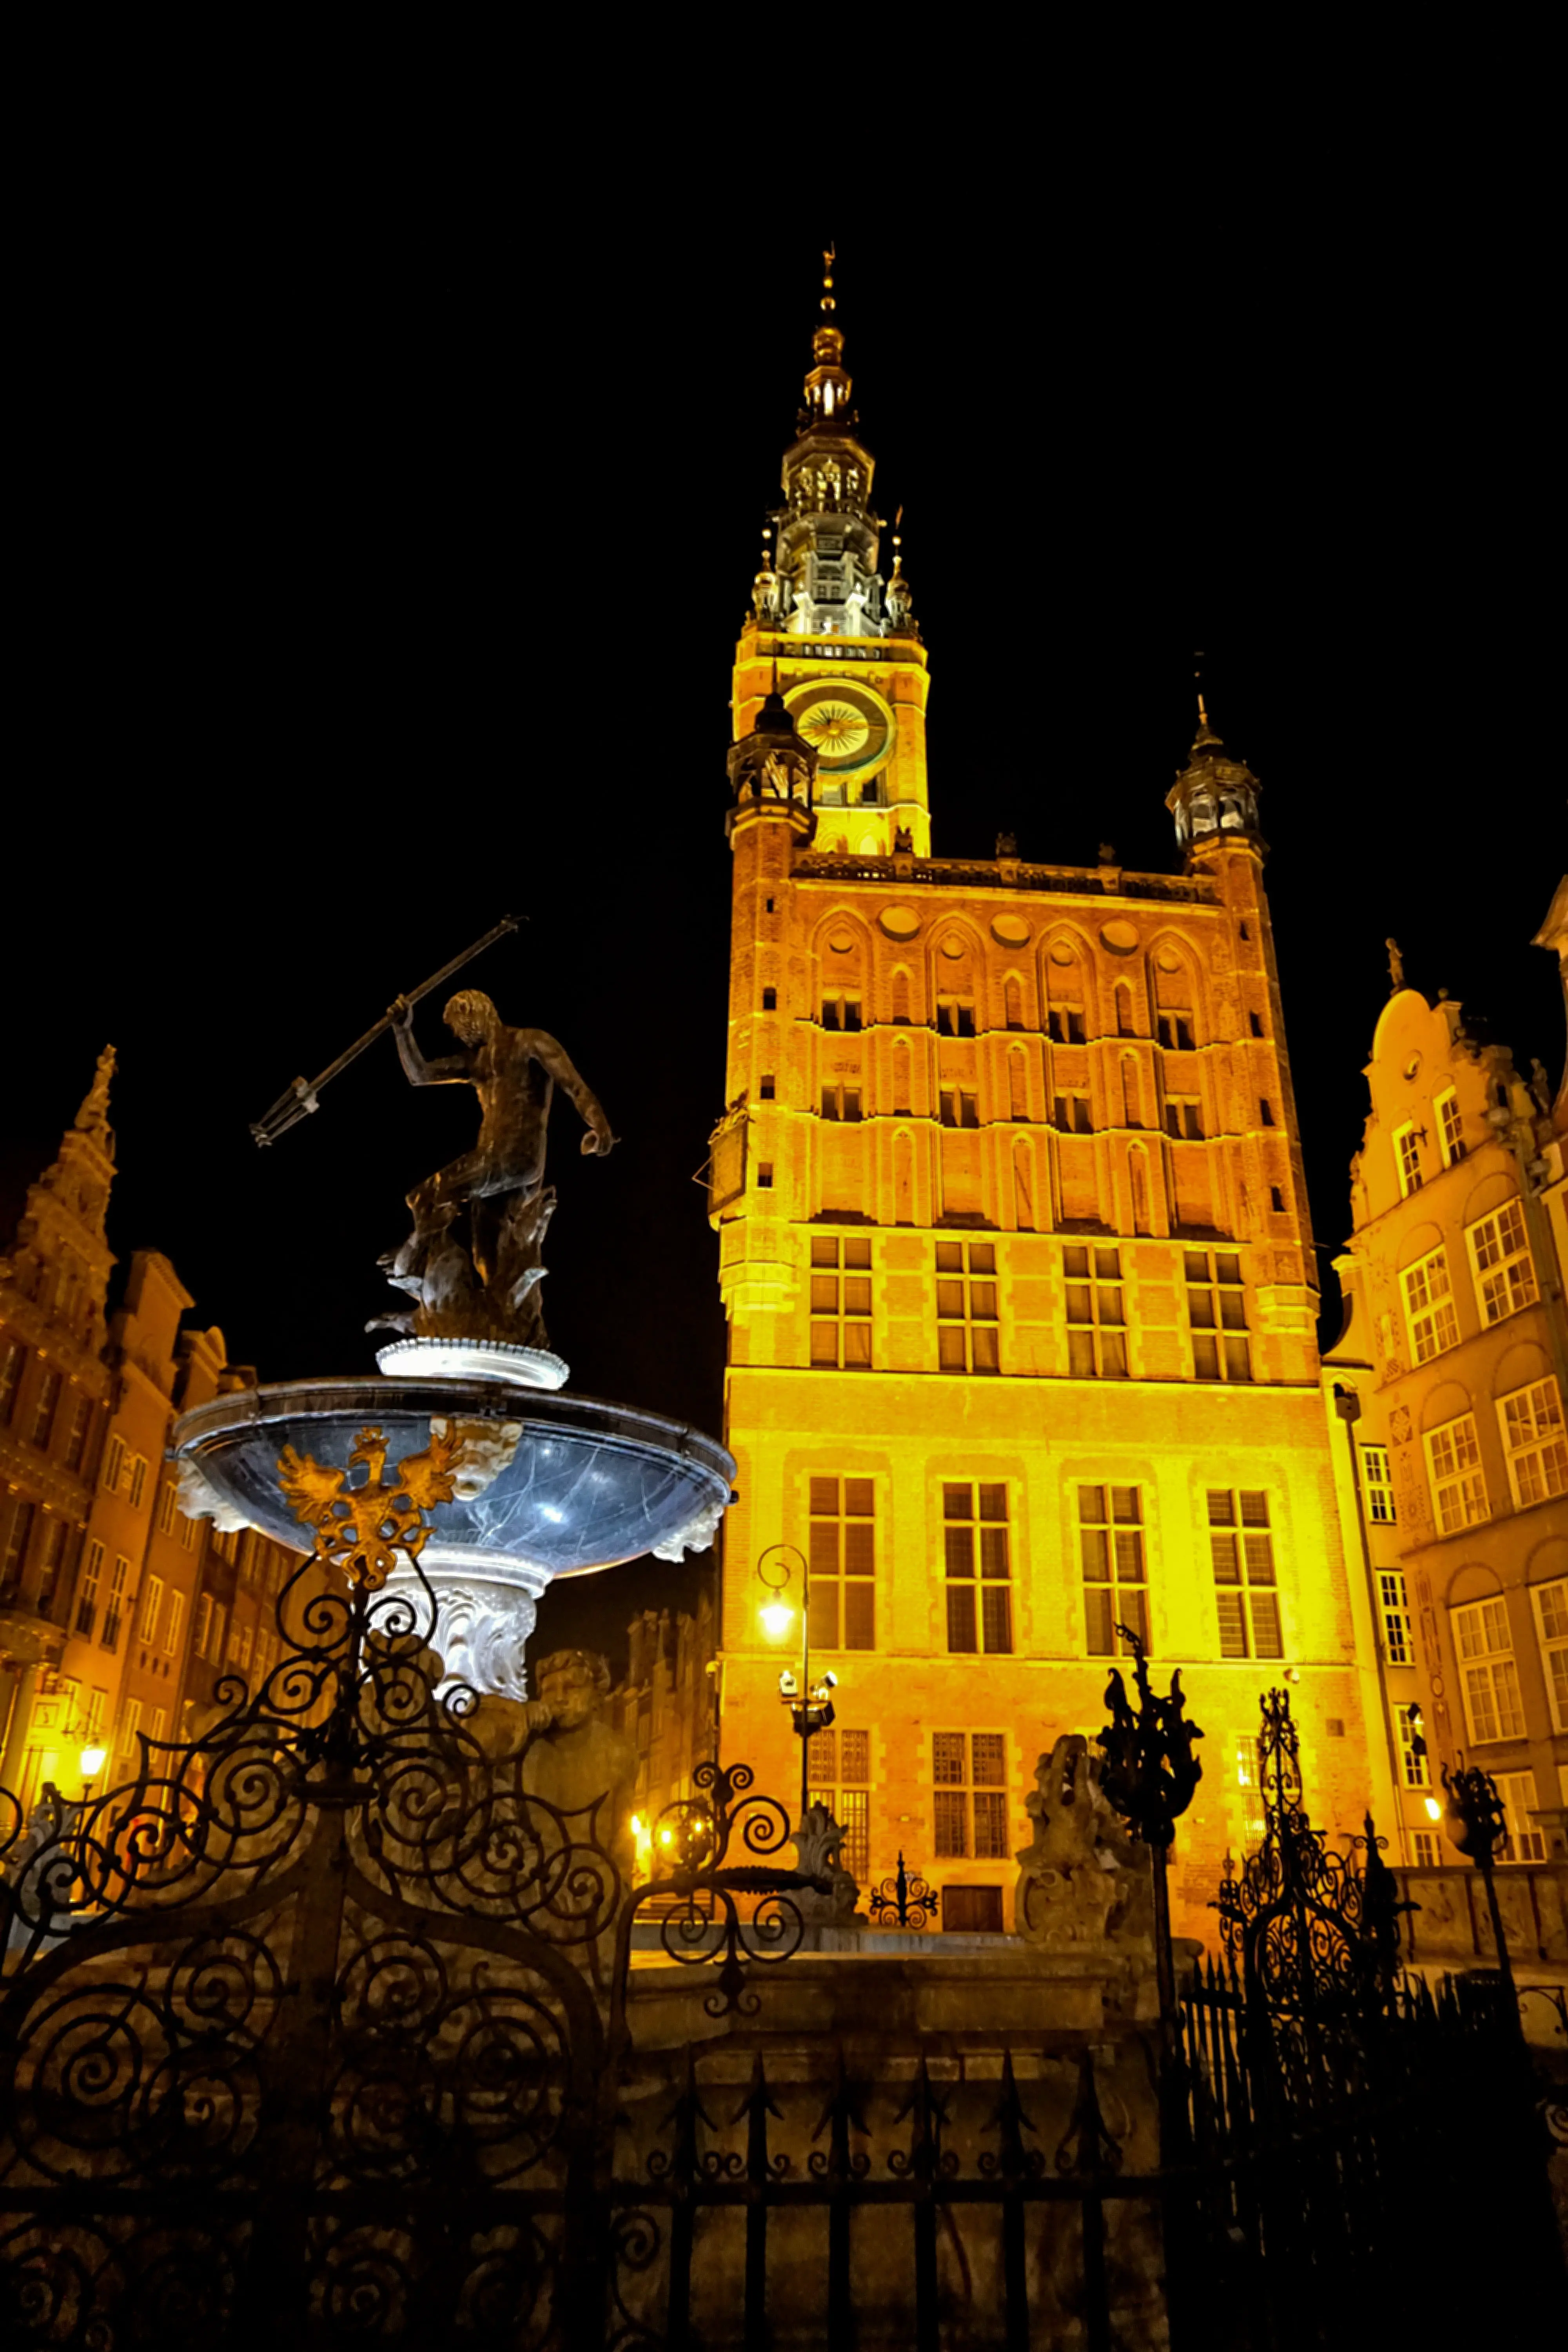 Gdansk, Poland - Experiencing the Globe